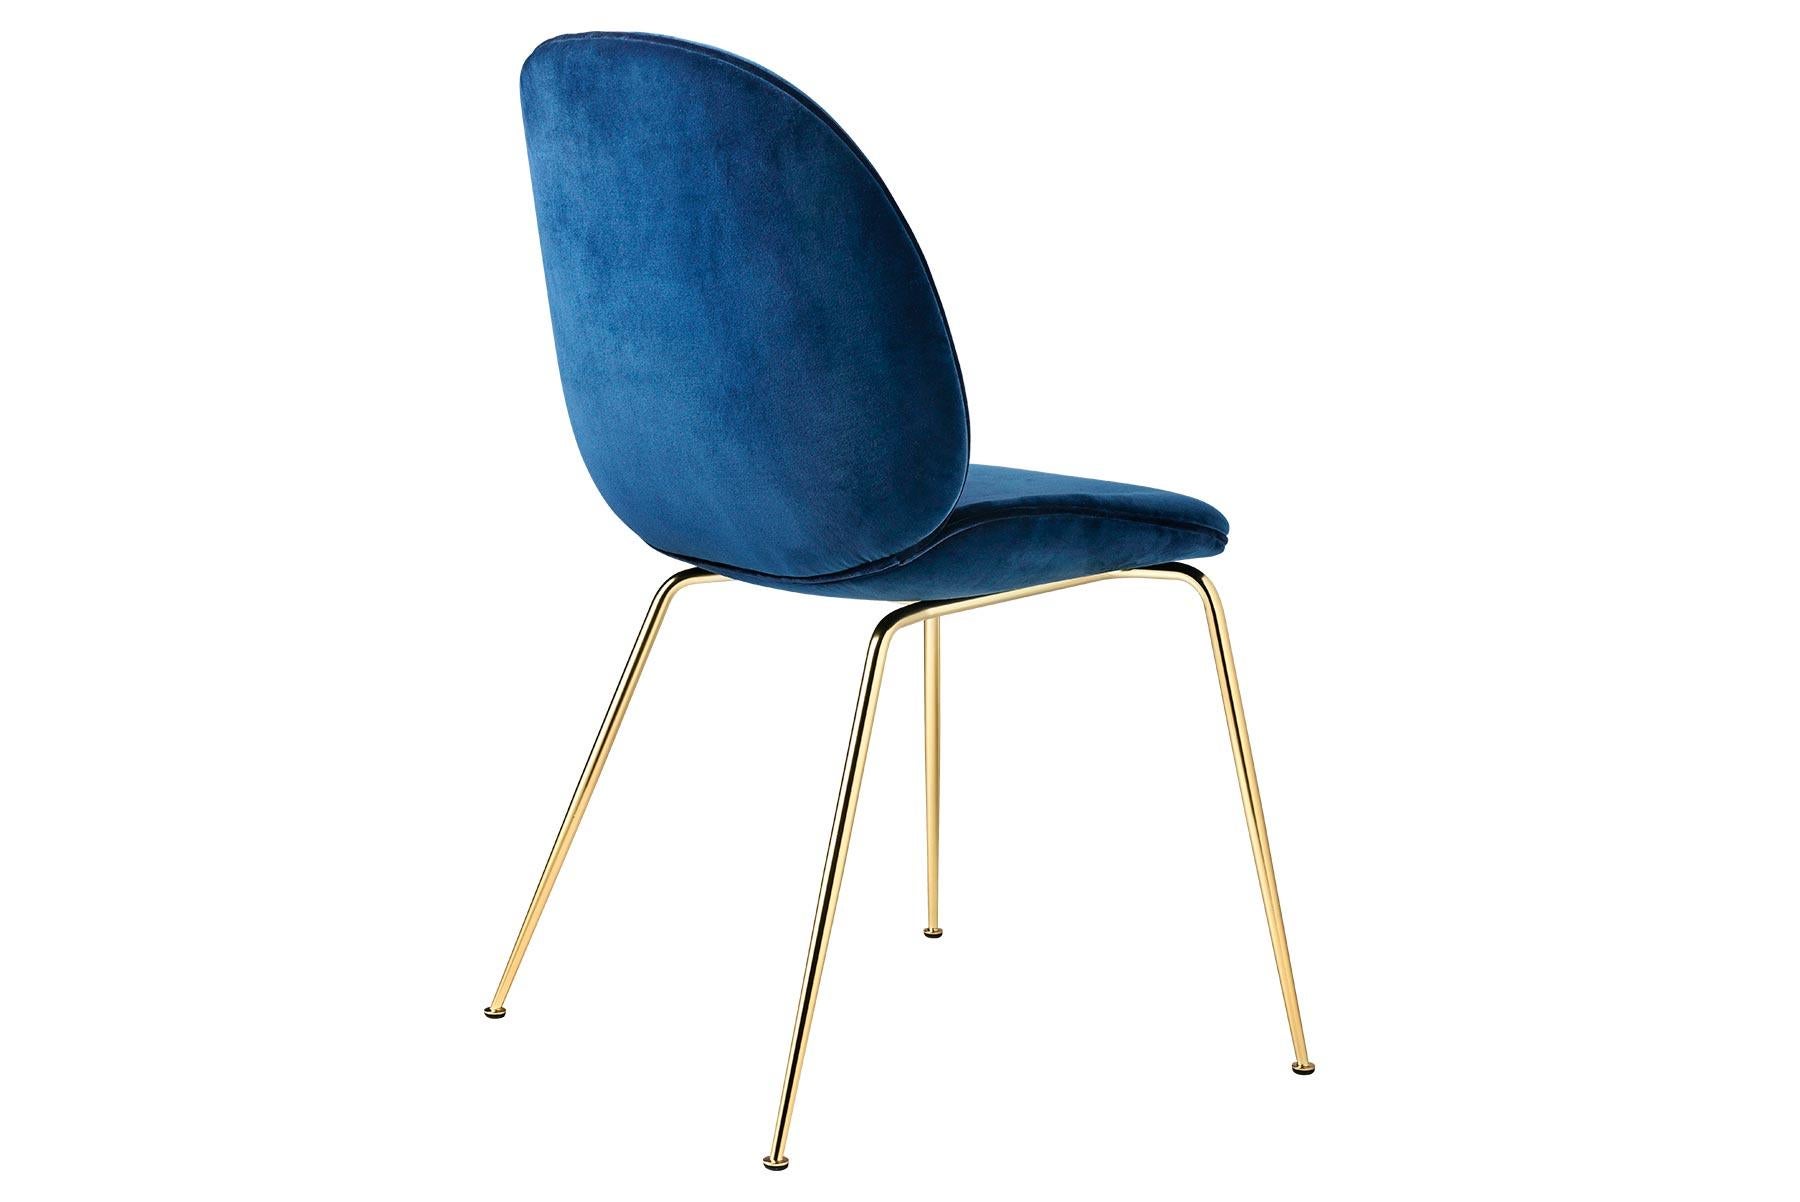 The Beetle Chair has since its introduction in 2013 being well received by end-consumers as well as interior architects. Due to its appealing design, outstanding comfort and unique customization possibilities, the chair can be seen in many of the